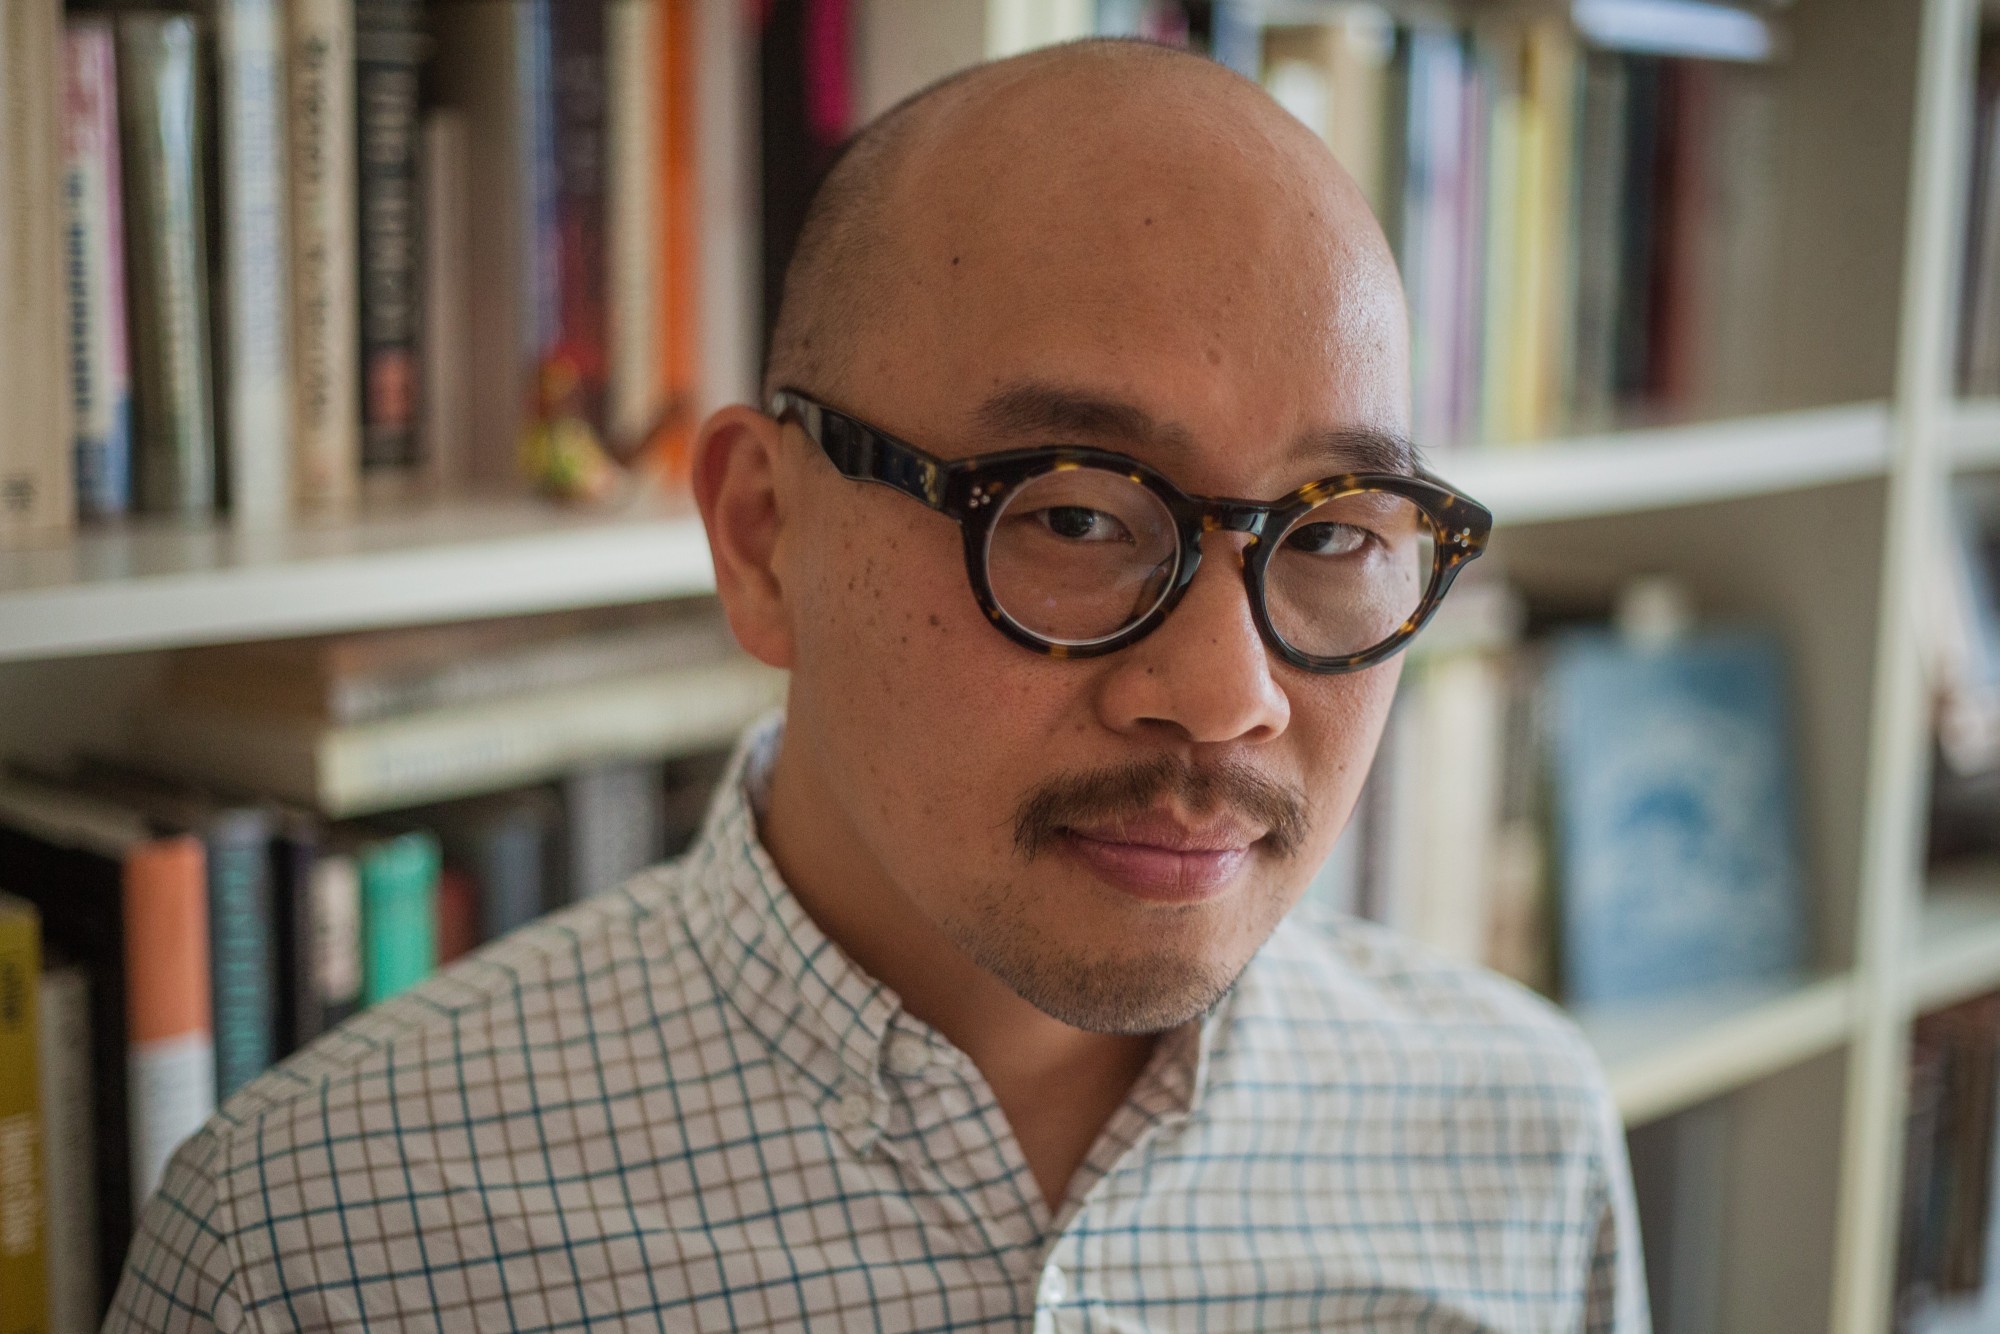 Eugene Lim stands in front of a bookcase, wearing round glasses and a button-up shirt.